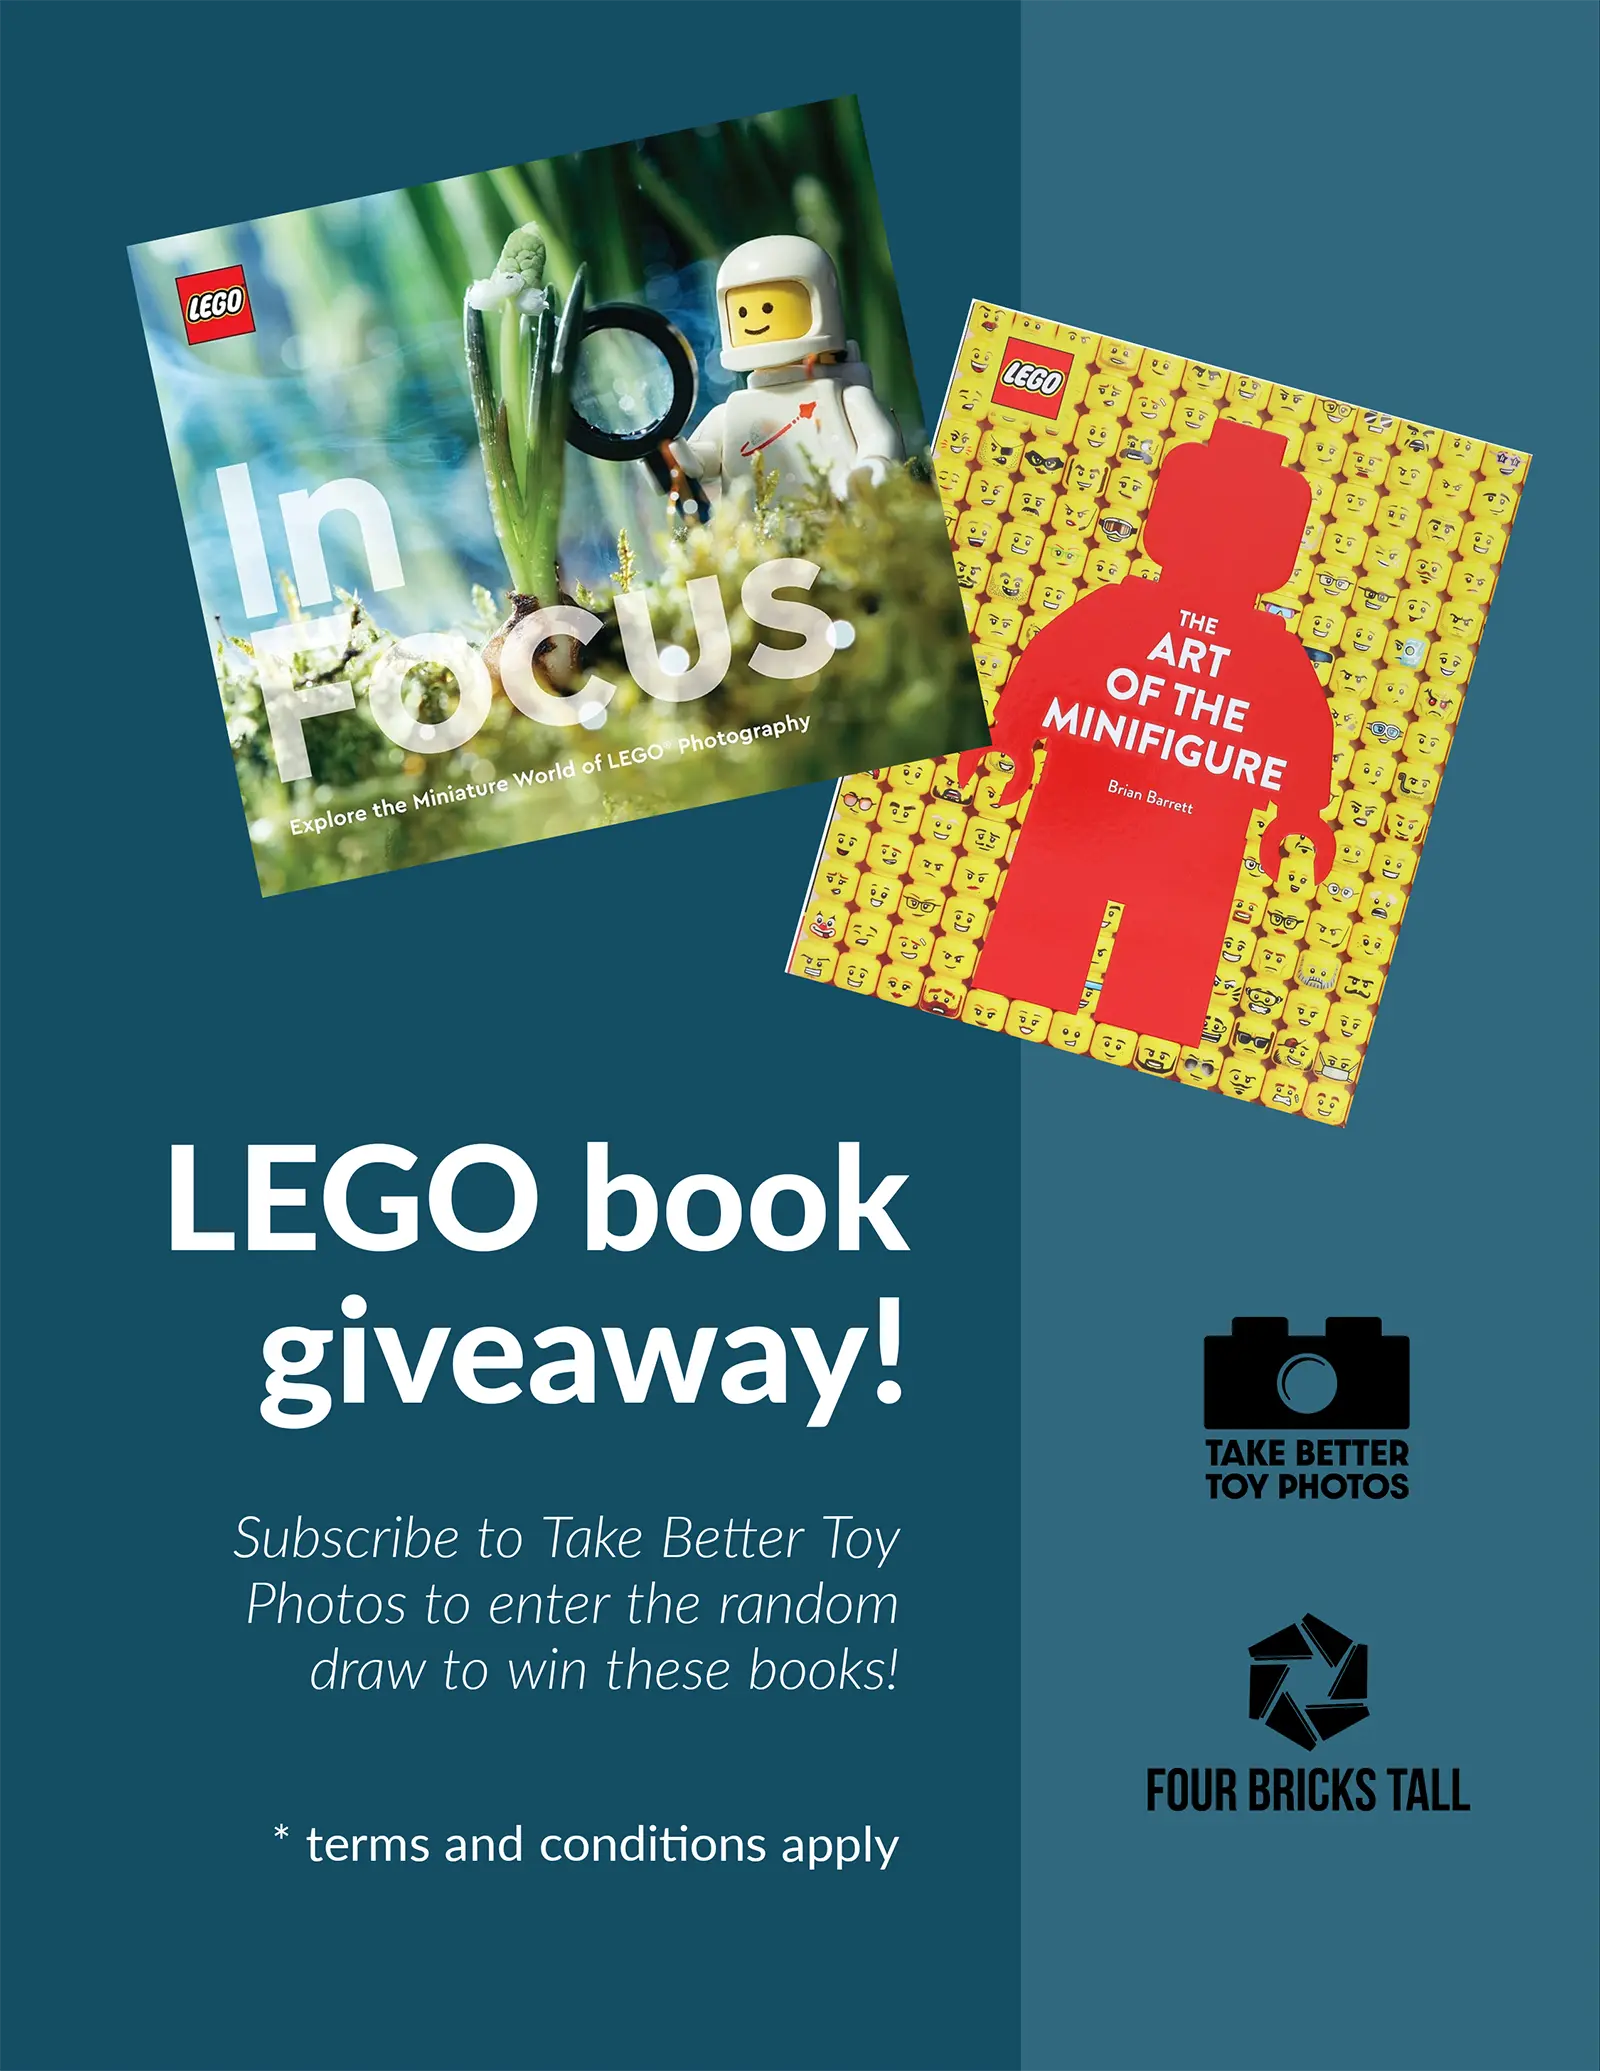 LEGO In Focus book giveaway